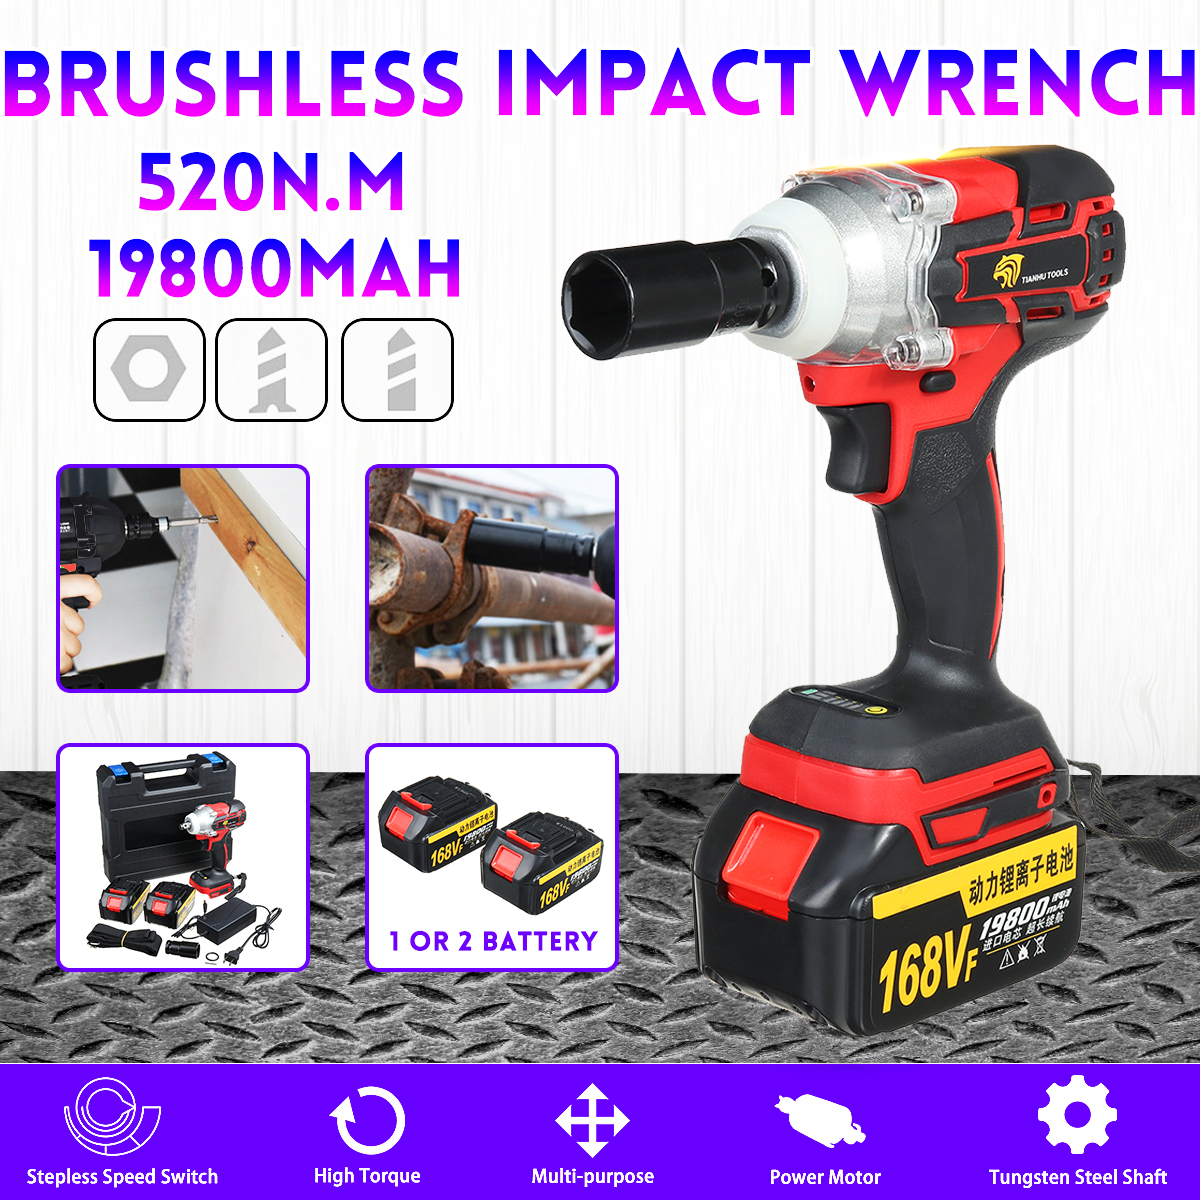 168VF-520Nm-High-Torque-Electric-Cordless-Brushless--Impact-Wrench-Tool-with-Rechargeable-Battery-1785233-1